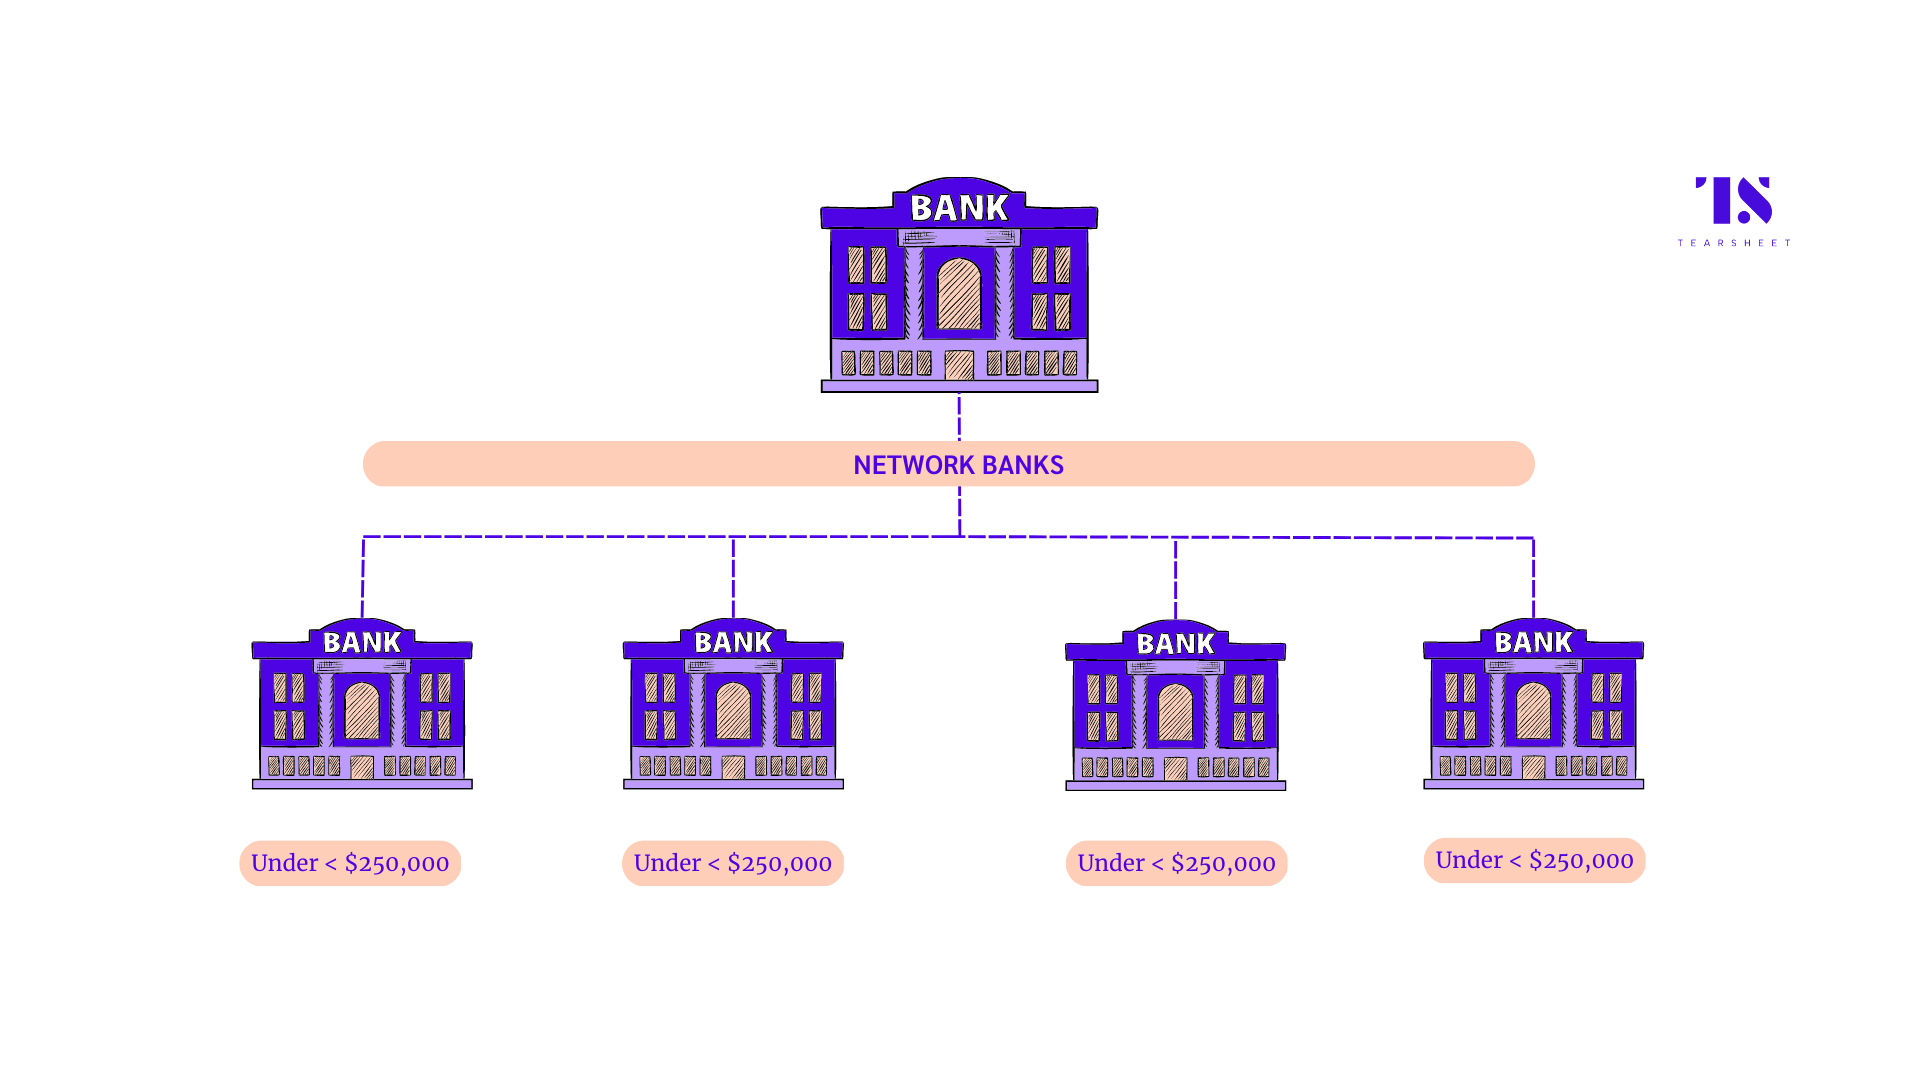 A relationship diagram showing how sweep networks work. Customers can split their deposits in chunks of $250,000 across a slew of network banks. 